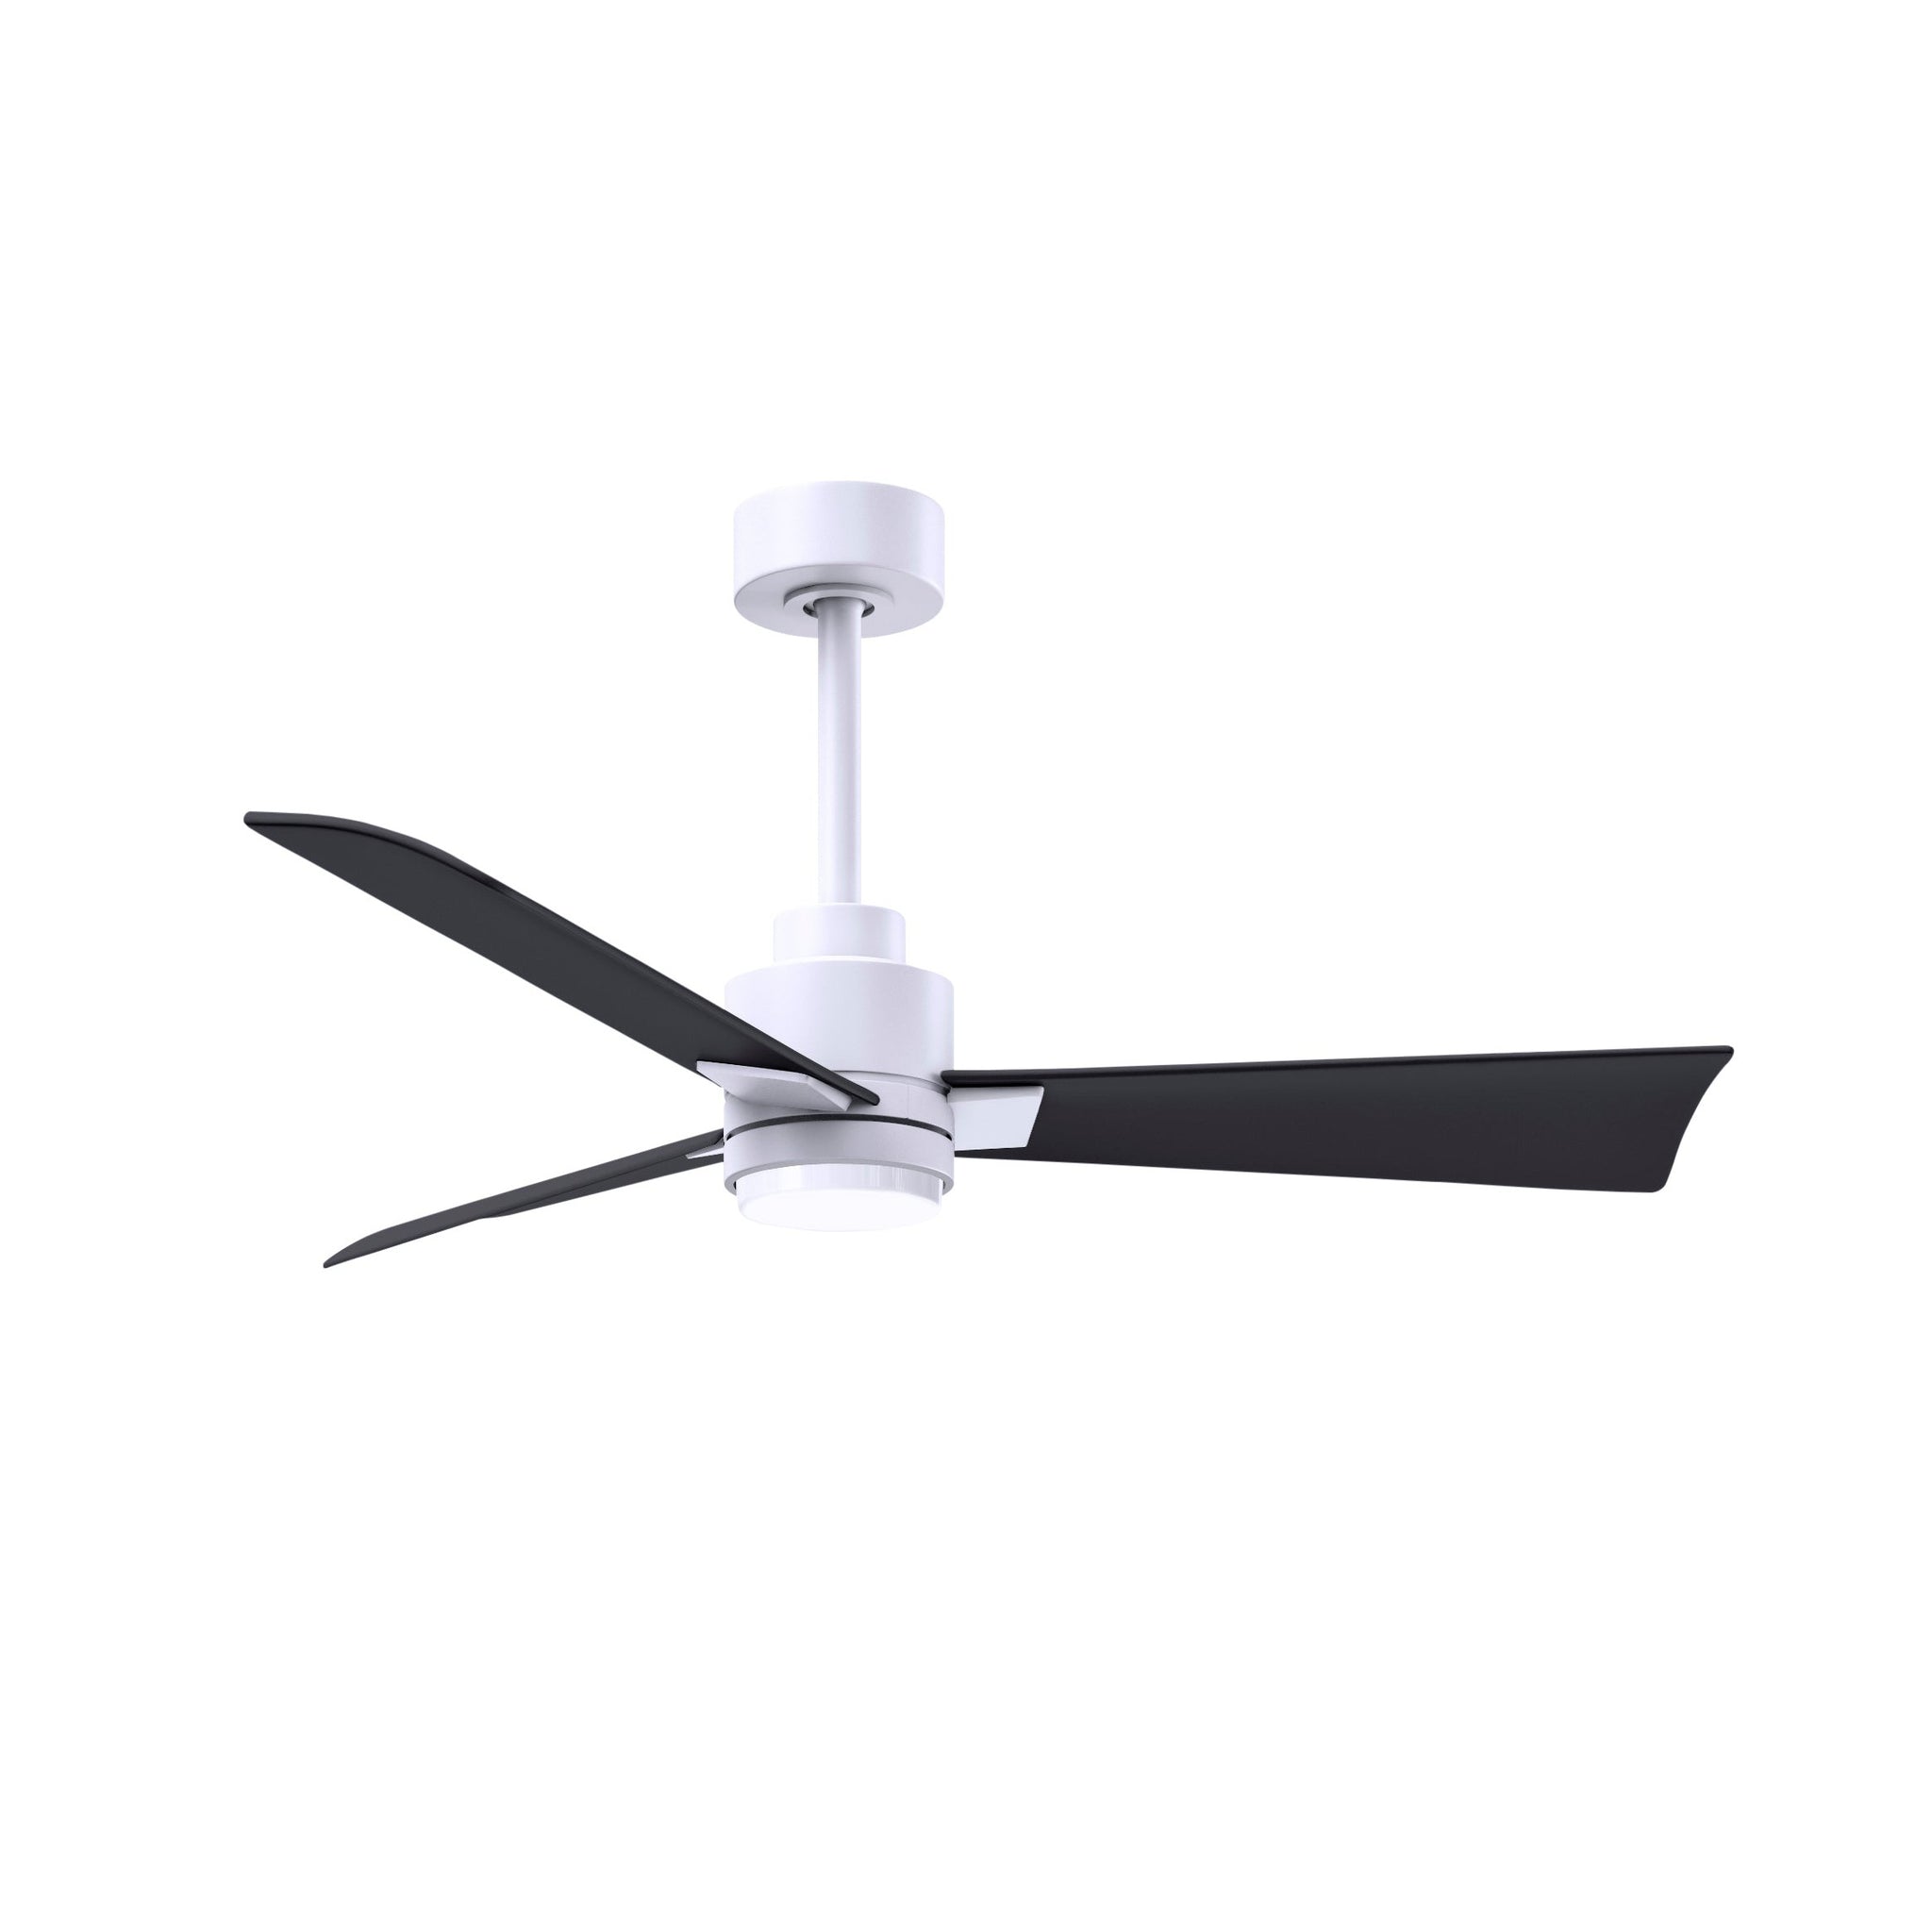 Alessandra 3 Blade Ceiling Fan With Light